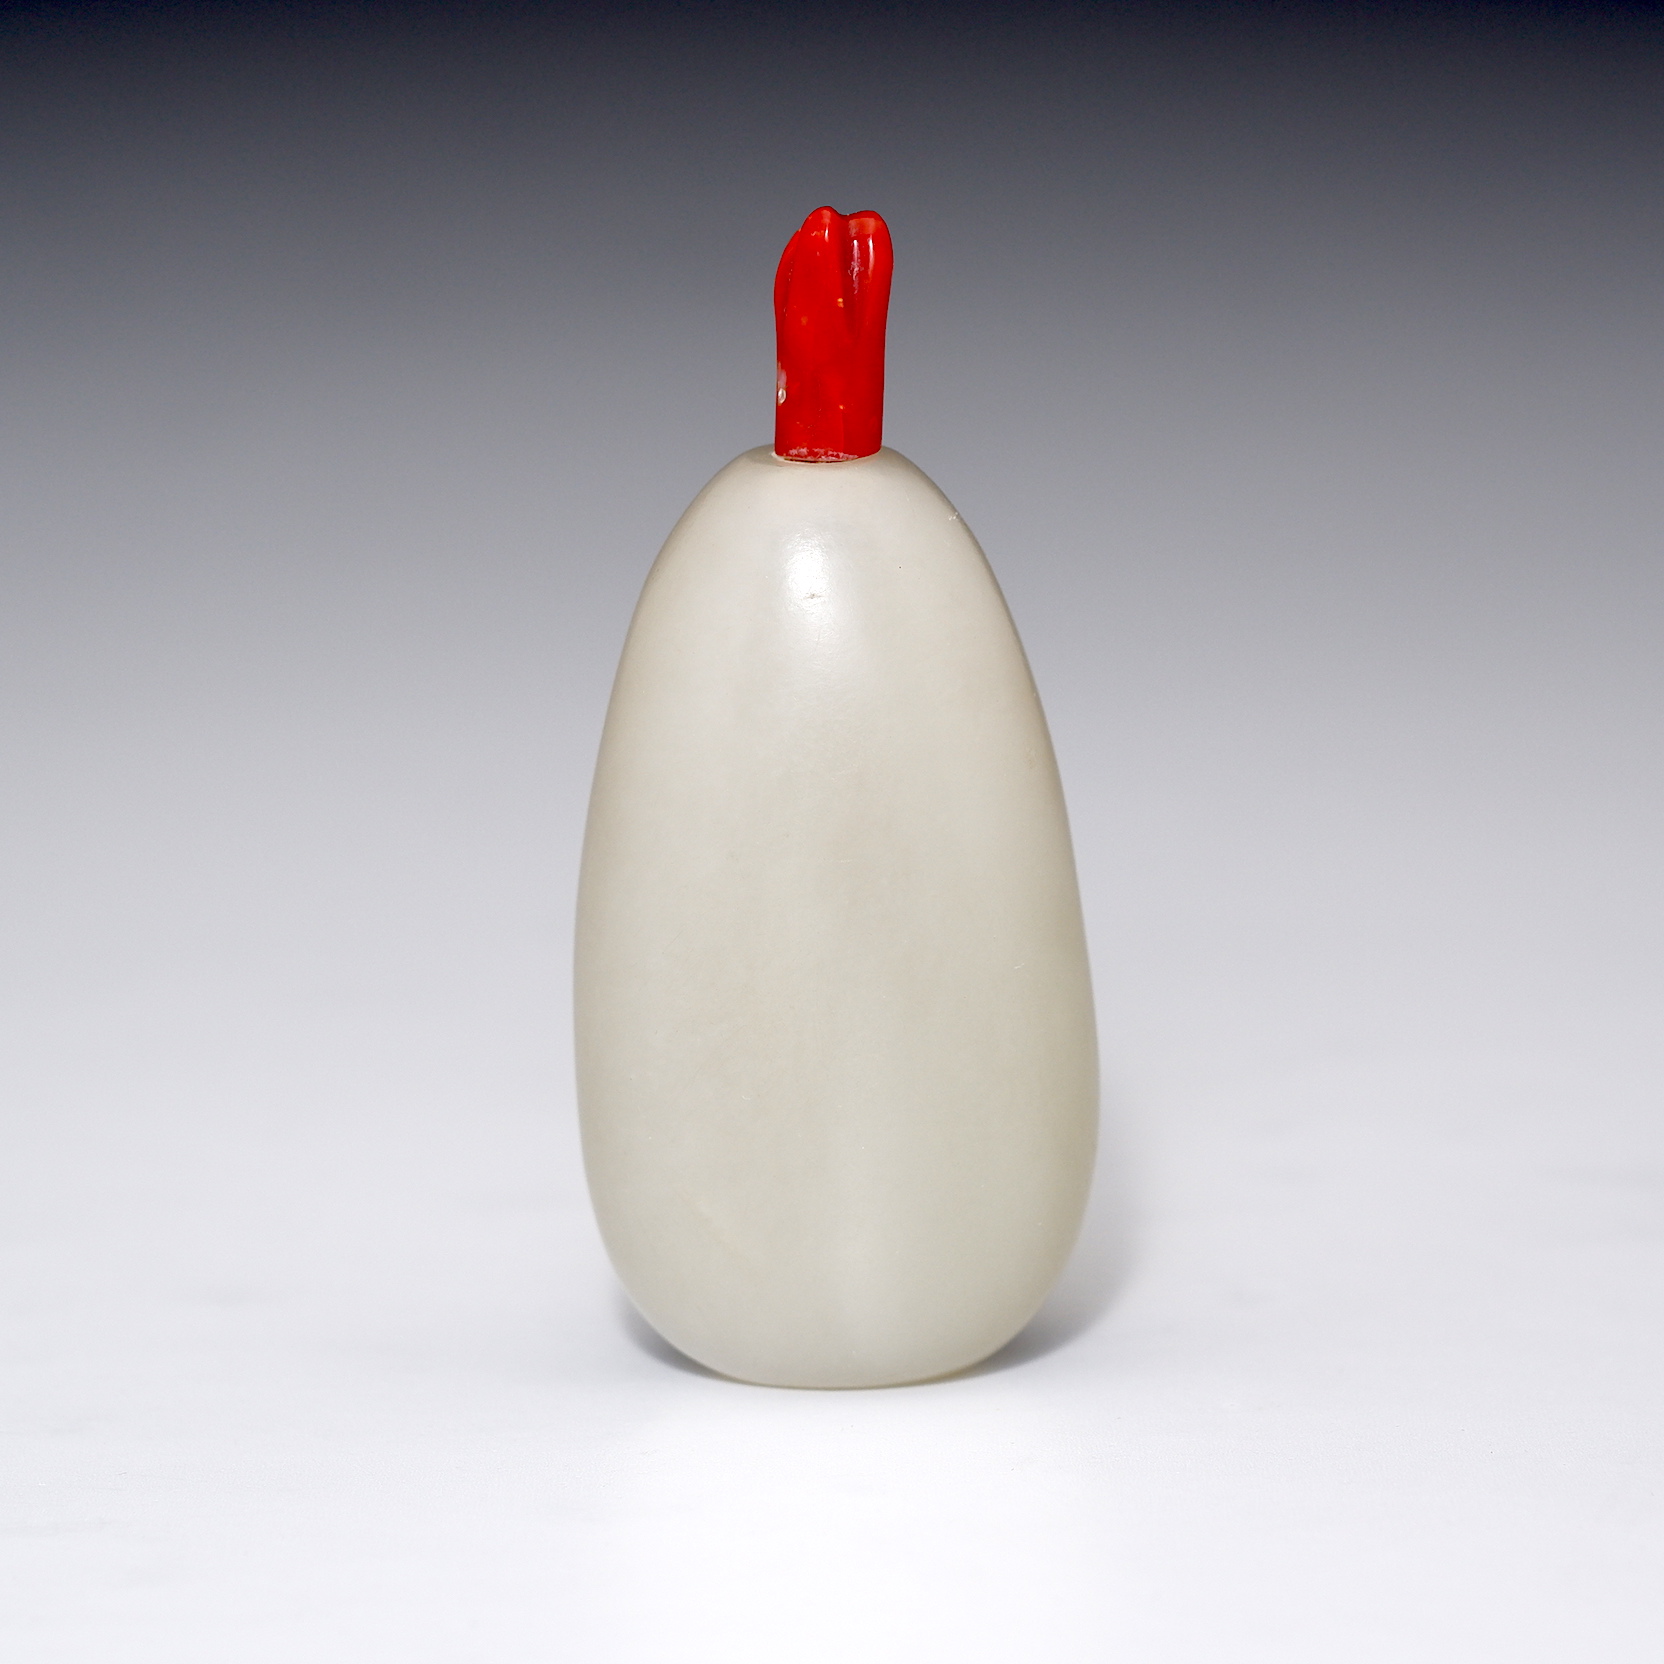 'Chinese White Jade Eggplant Shape Snuff Bottle with Pink Coral Stopper'